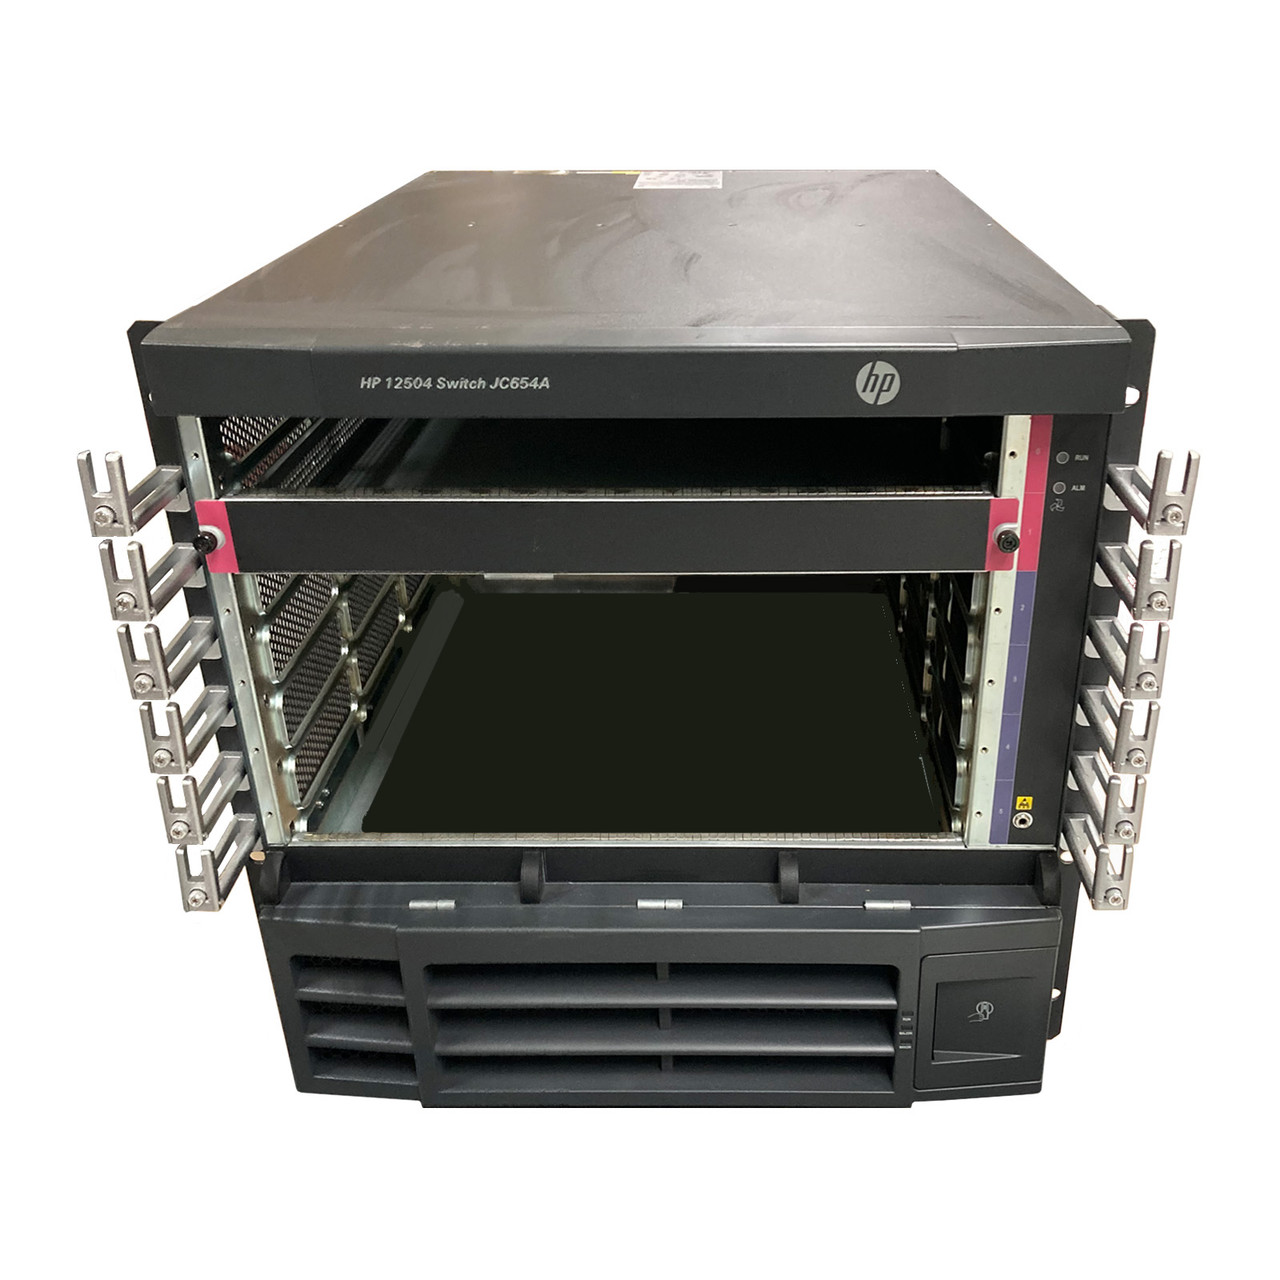 HPE JC654A 12504 AC Switch Chassis